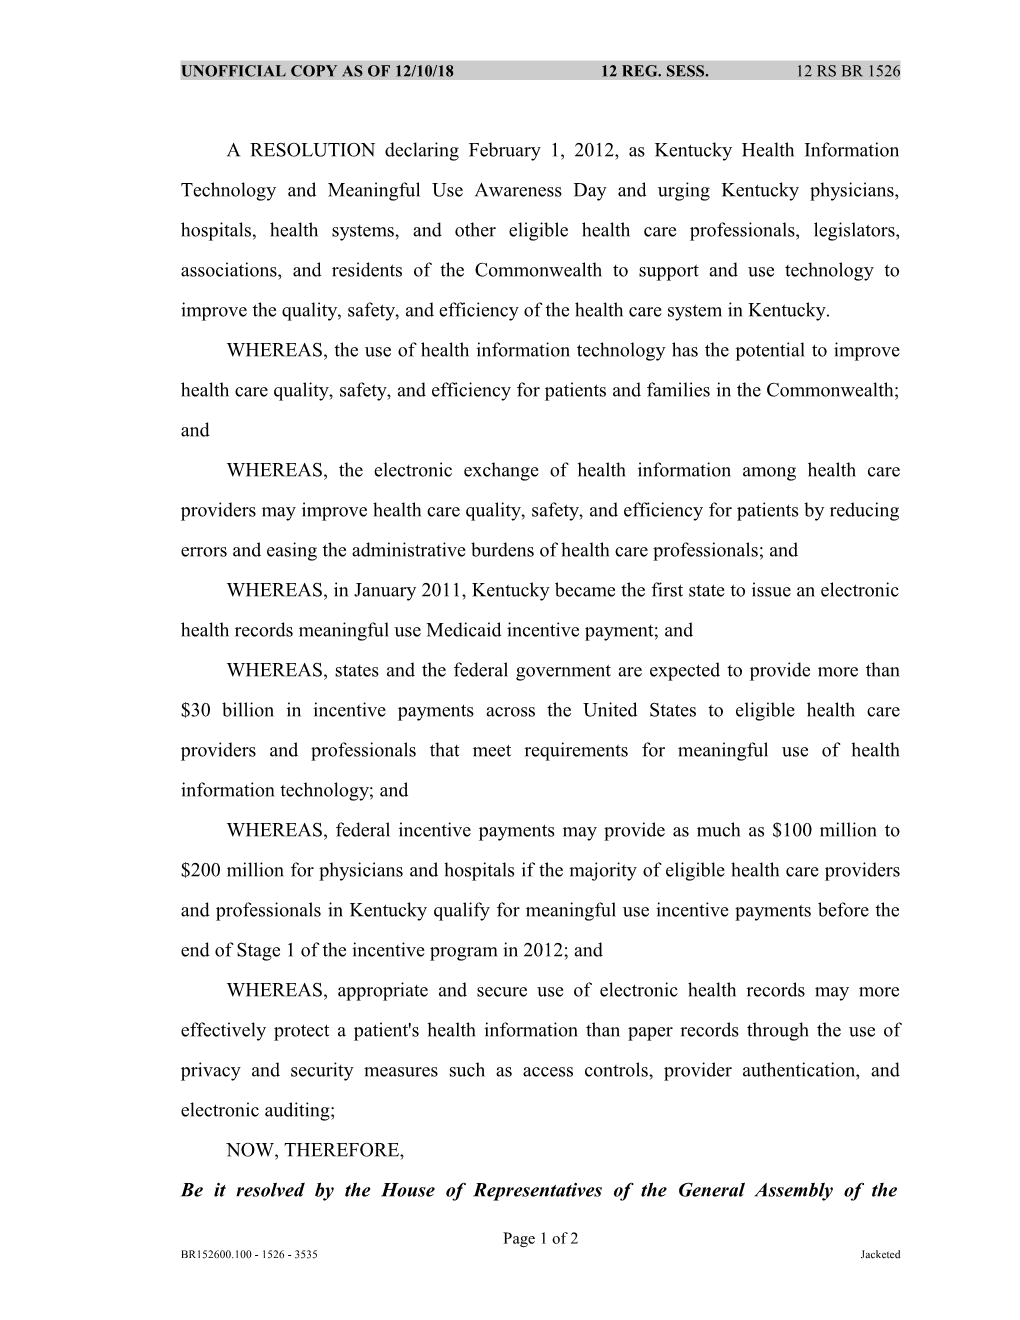 A RESOLUTION Declaring February 1, 2012, As Kentucky Health Information Technology And